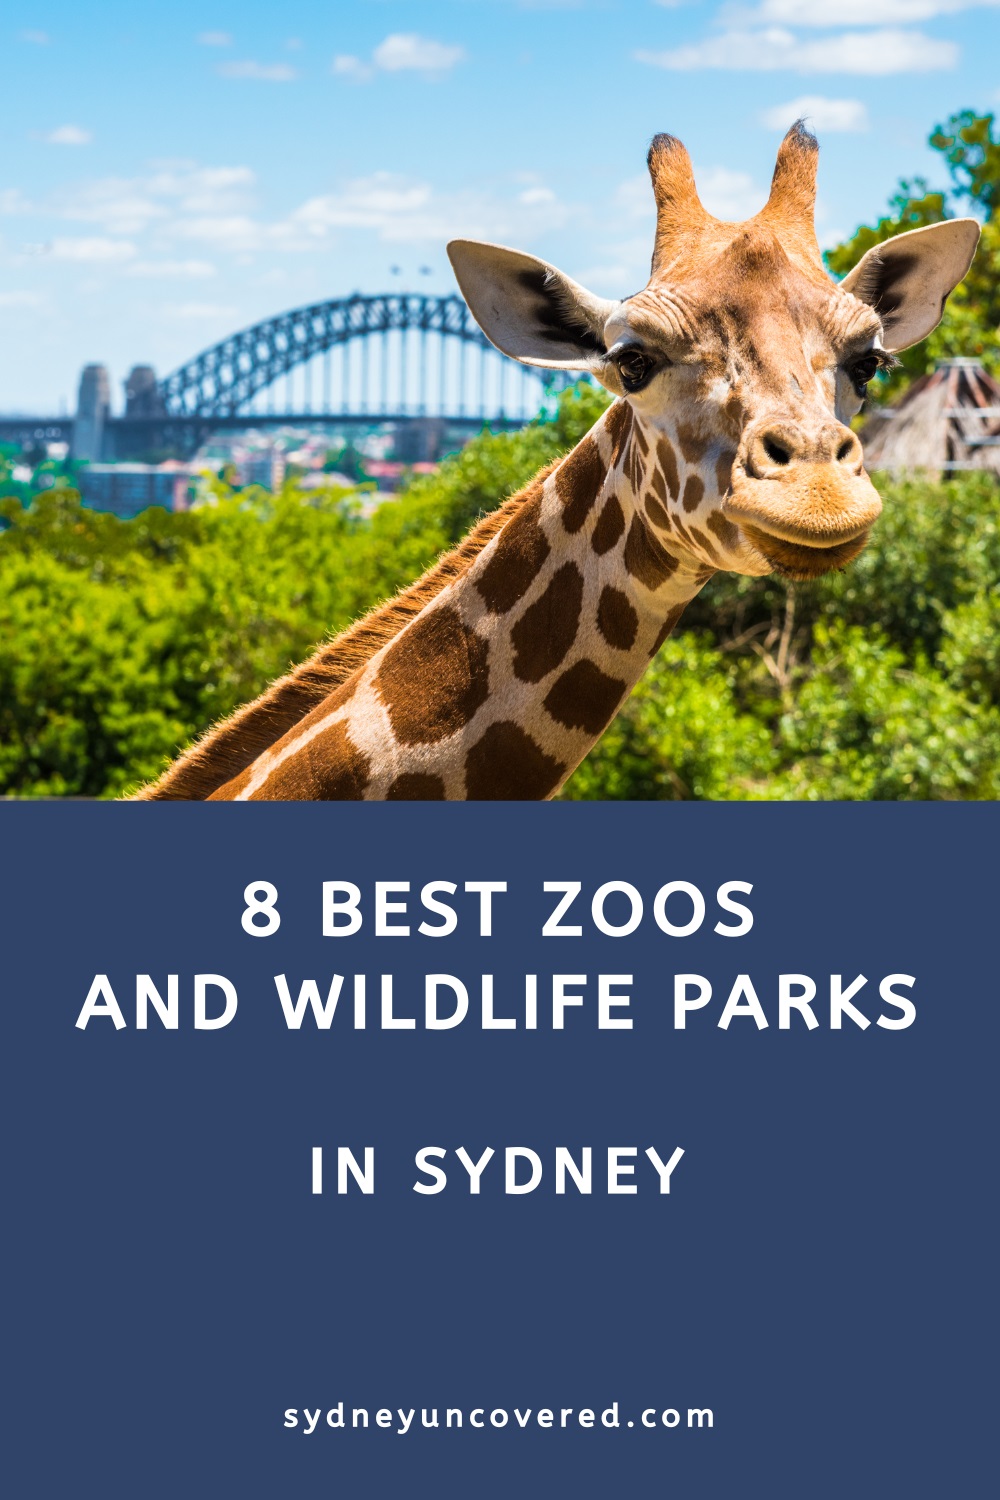 8 Best wildlife parks and zoos in Sydney